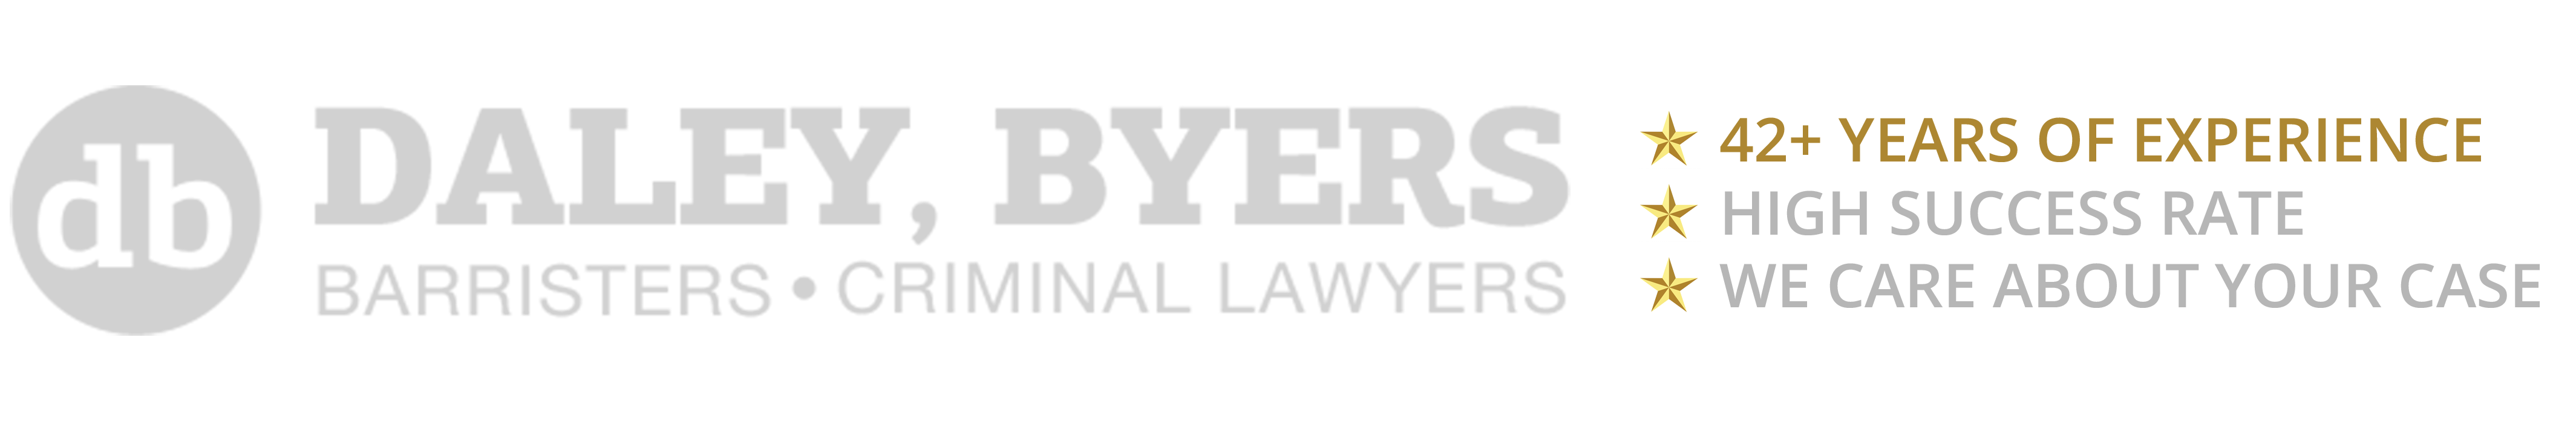 Daley Byers | Criminal Lawyers that will fight for your rights!